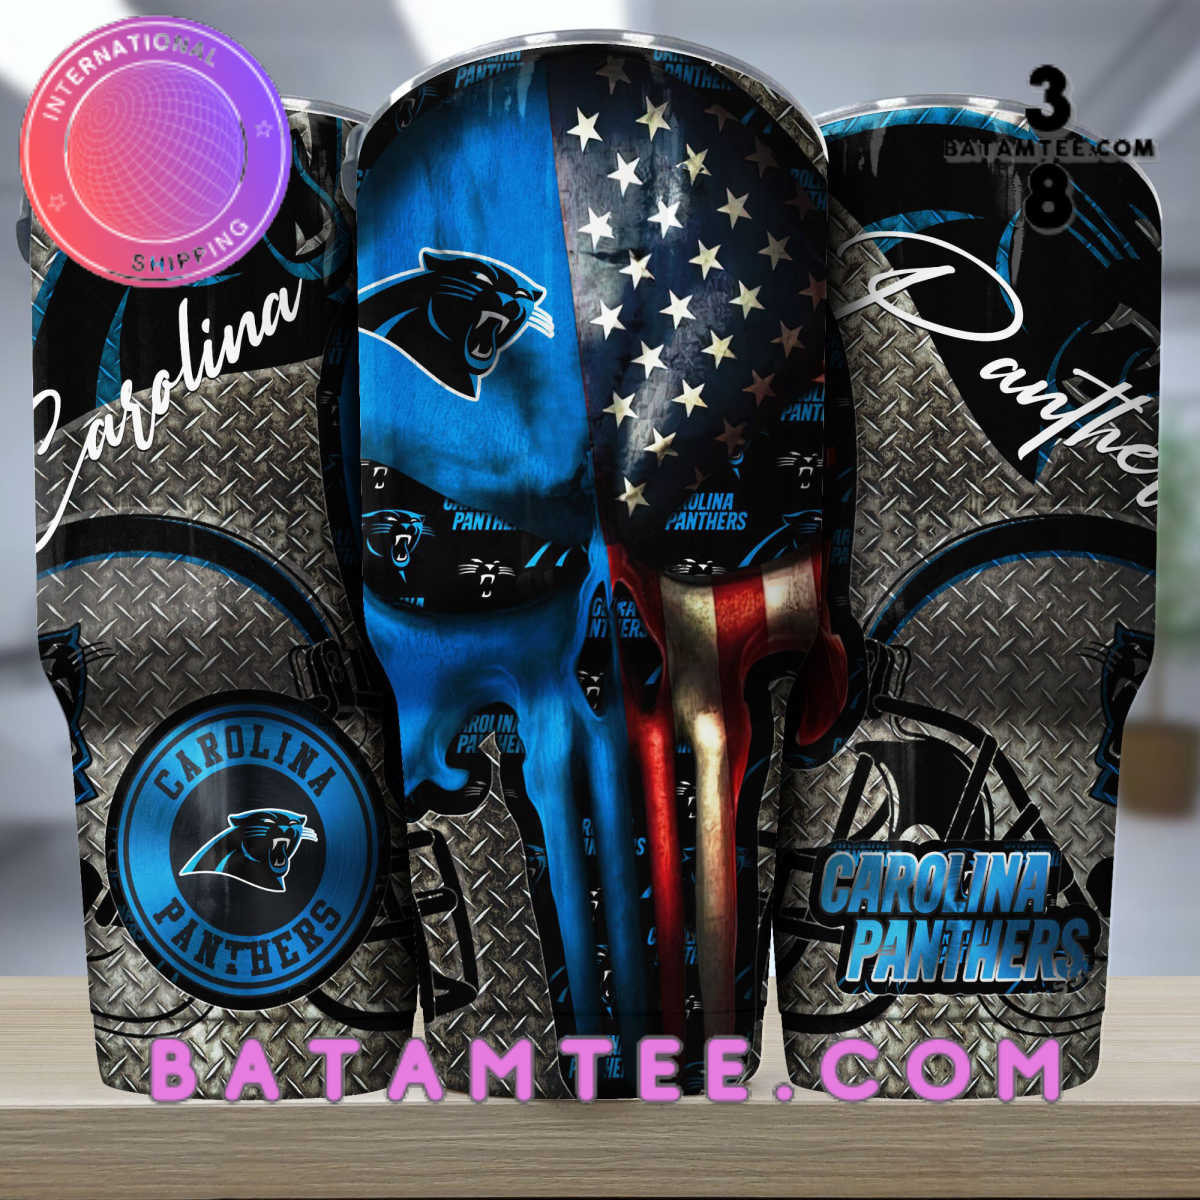 Carolina Panthers Skull Tumbler's Overview - Batamtee Shop - Threads & Totes: Your Style Destination